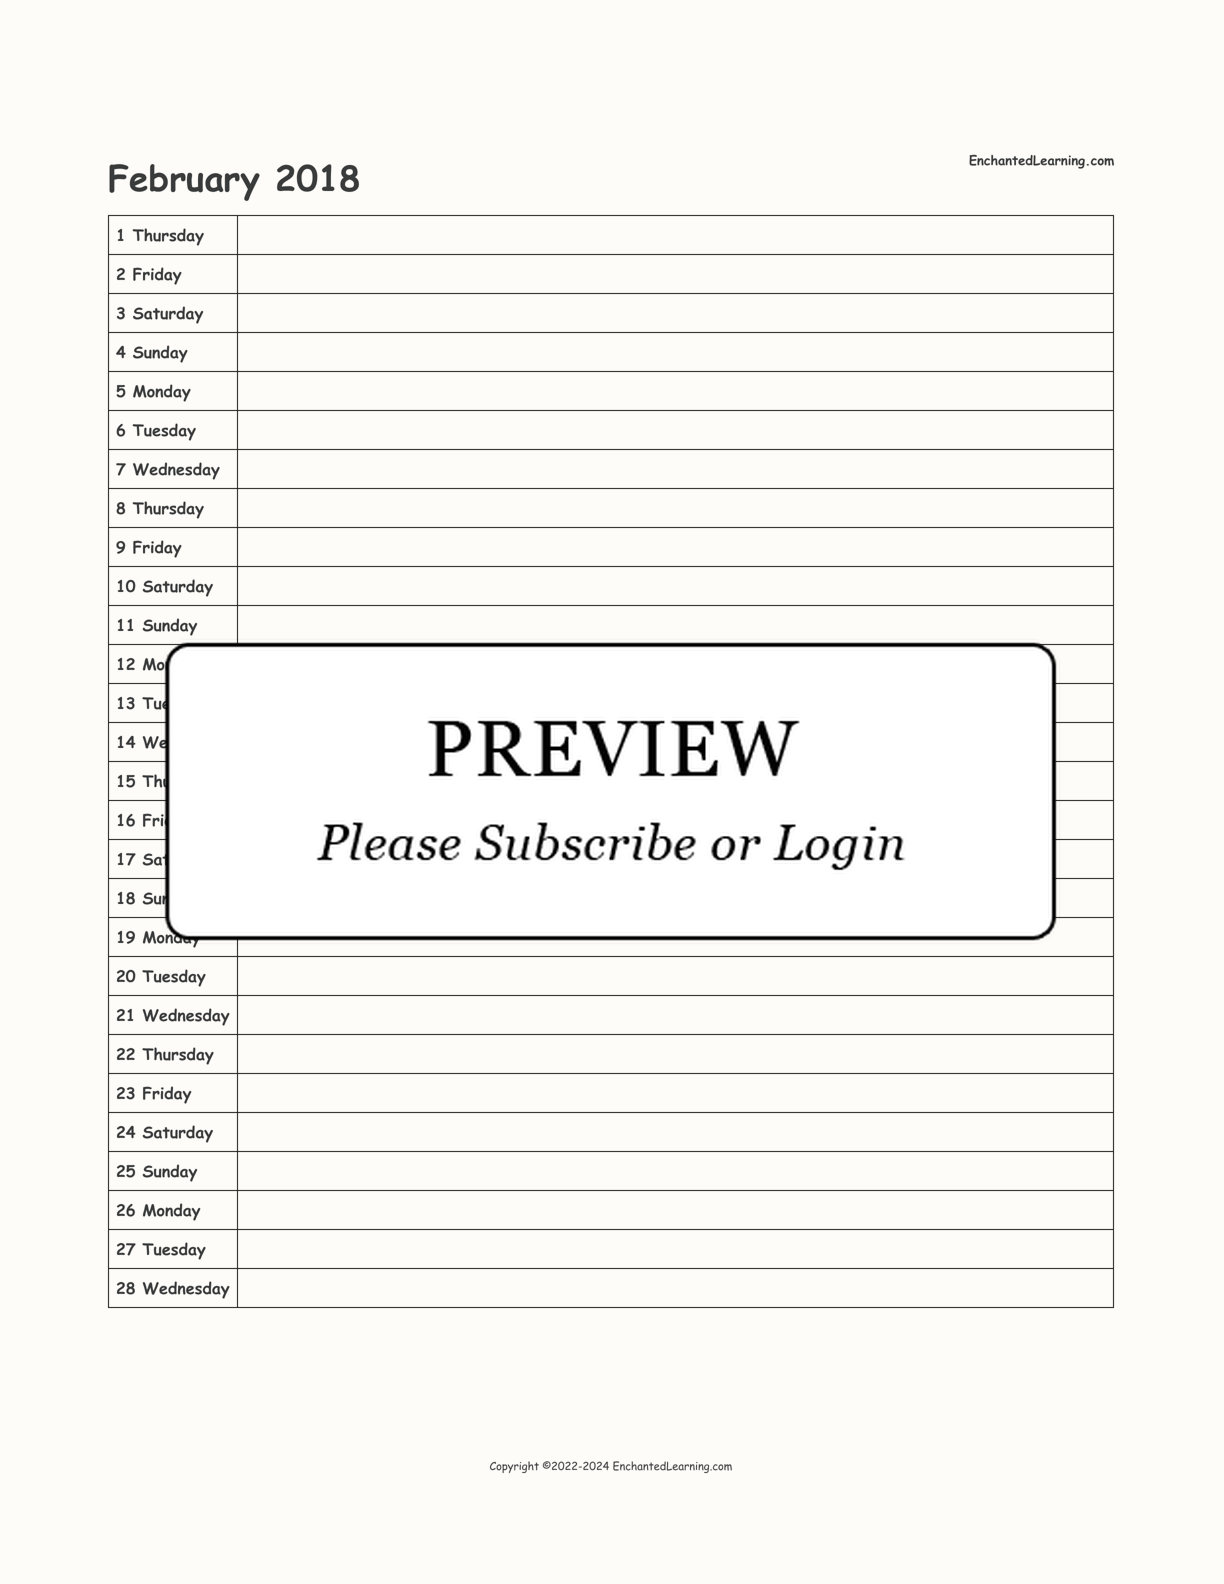 2018 Scheduling Calendar interactive printout page 2